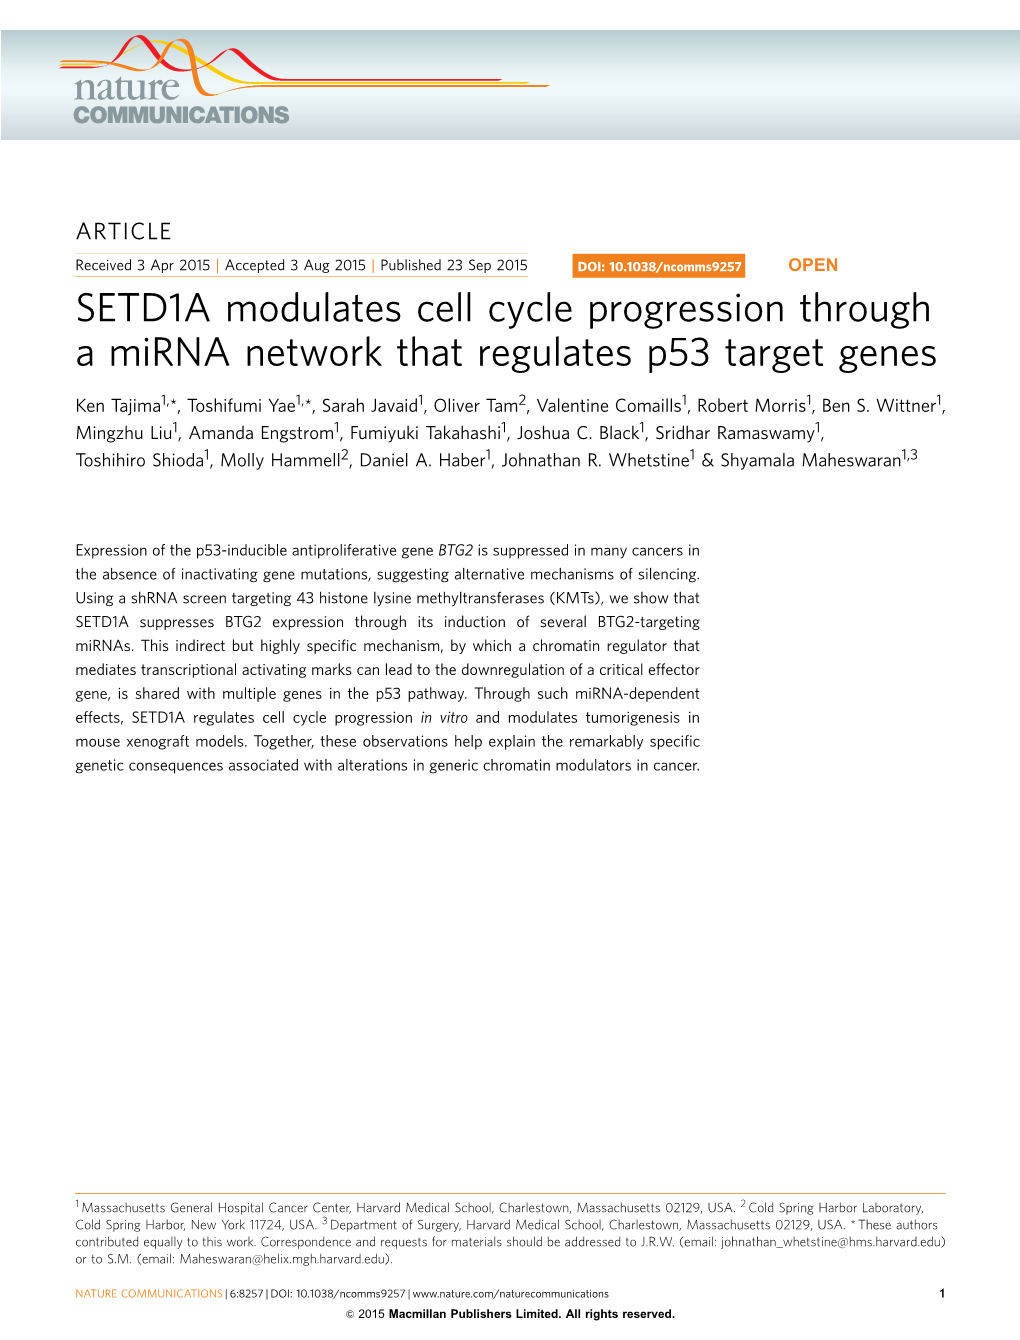 SETD1A Modulates Cell Cycle Progression Through a Mirna Network That Regulates P53 Target Genes